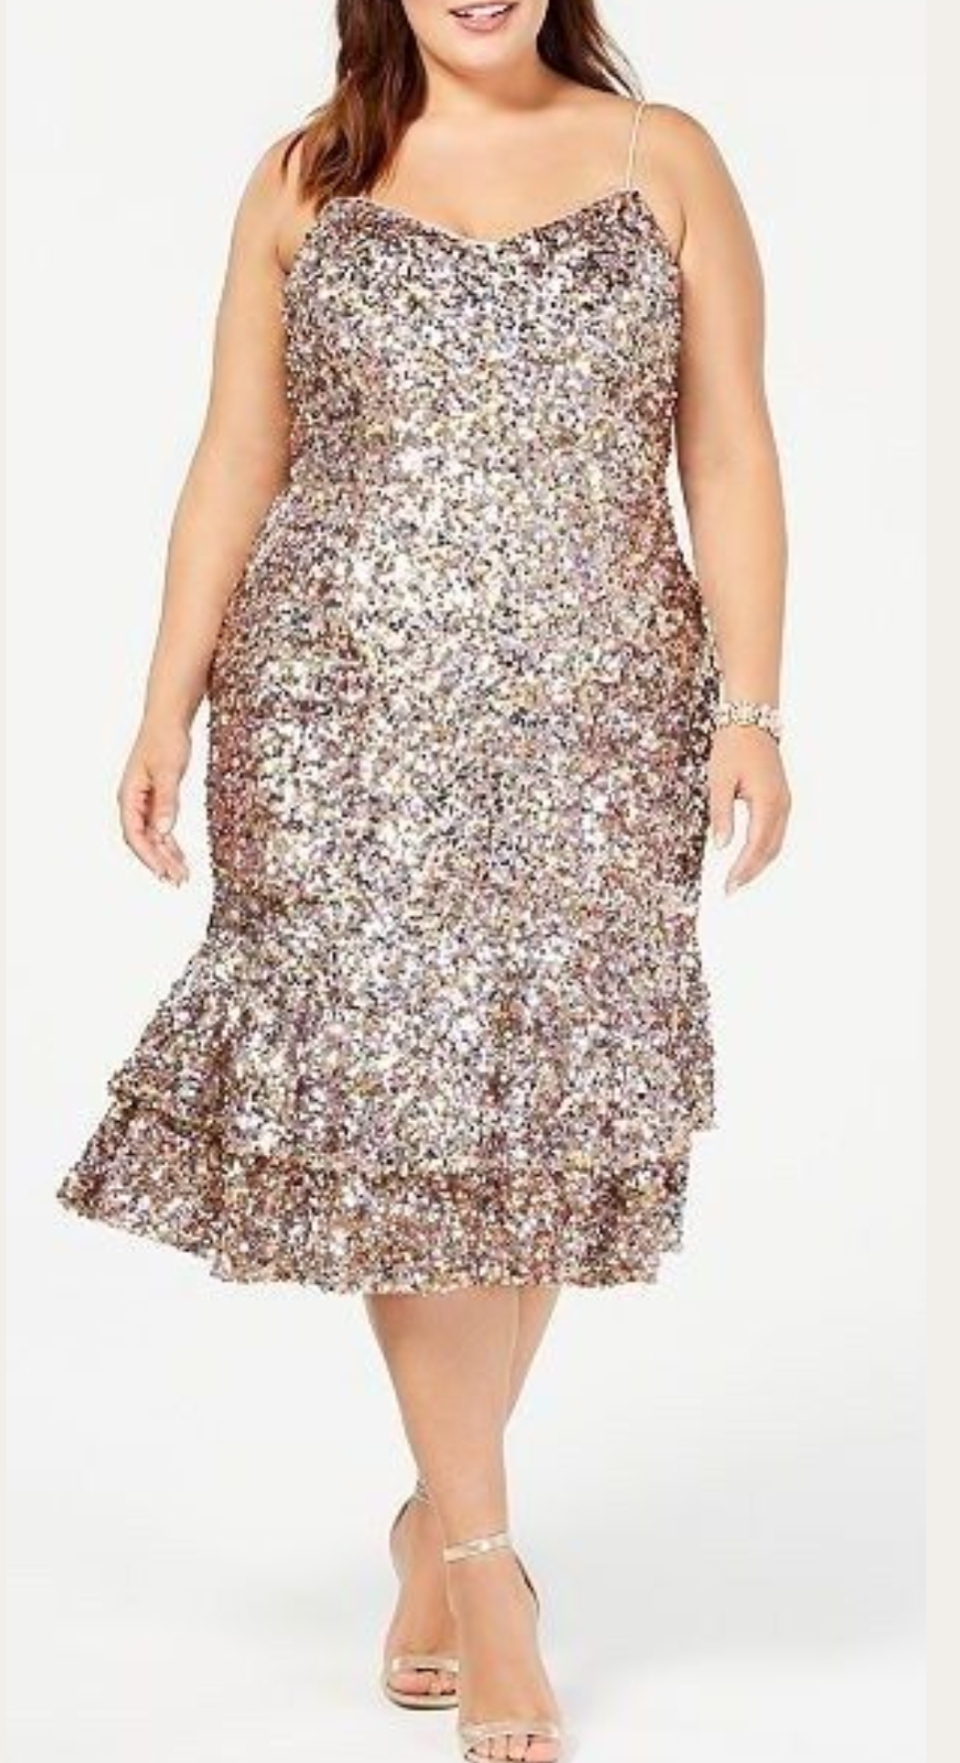 Trendy new Year Eve's plus size dresses